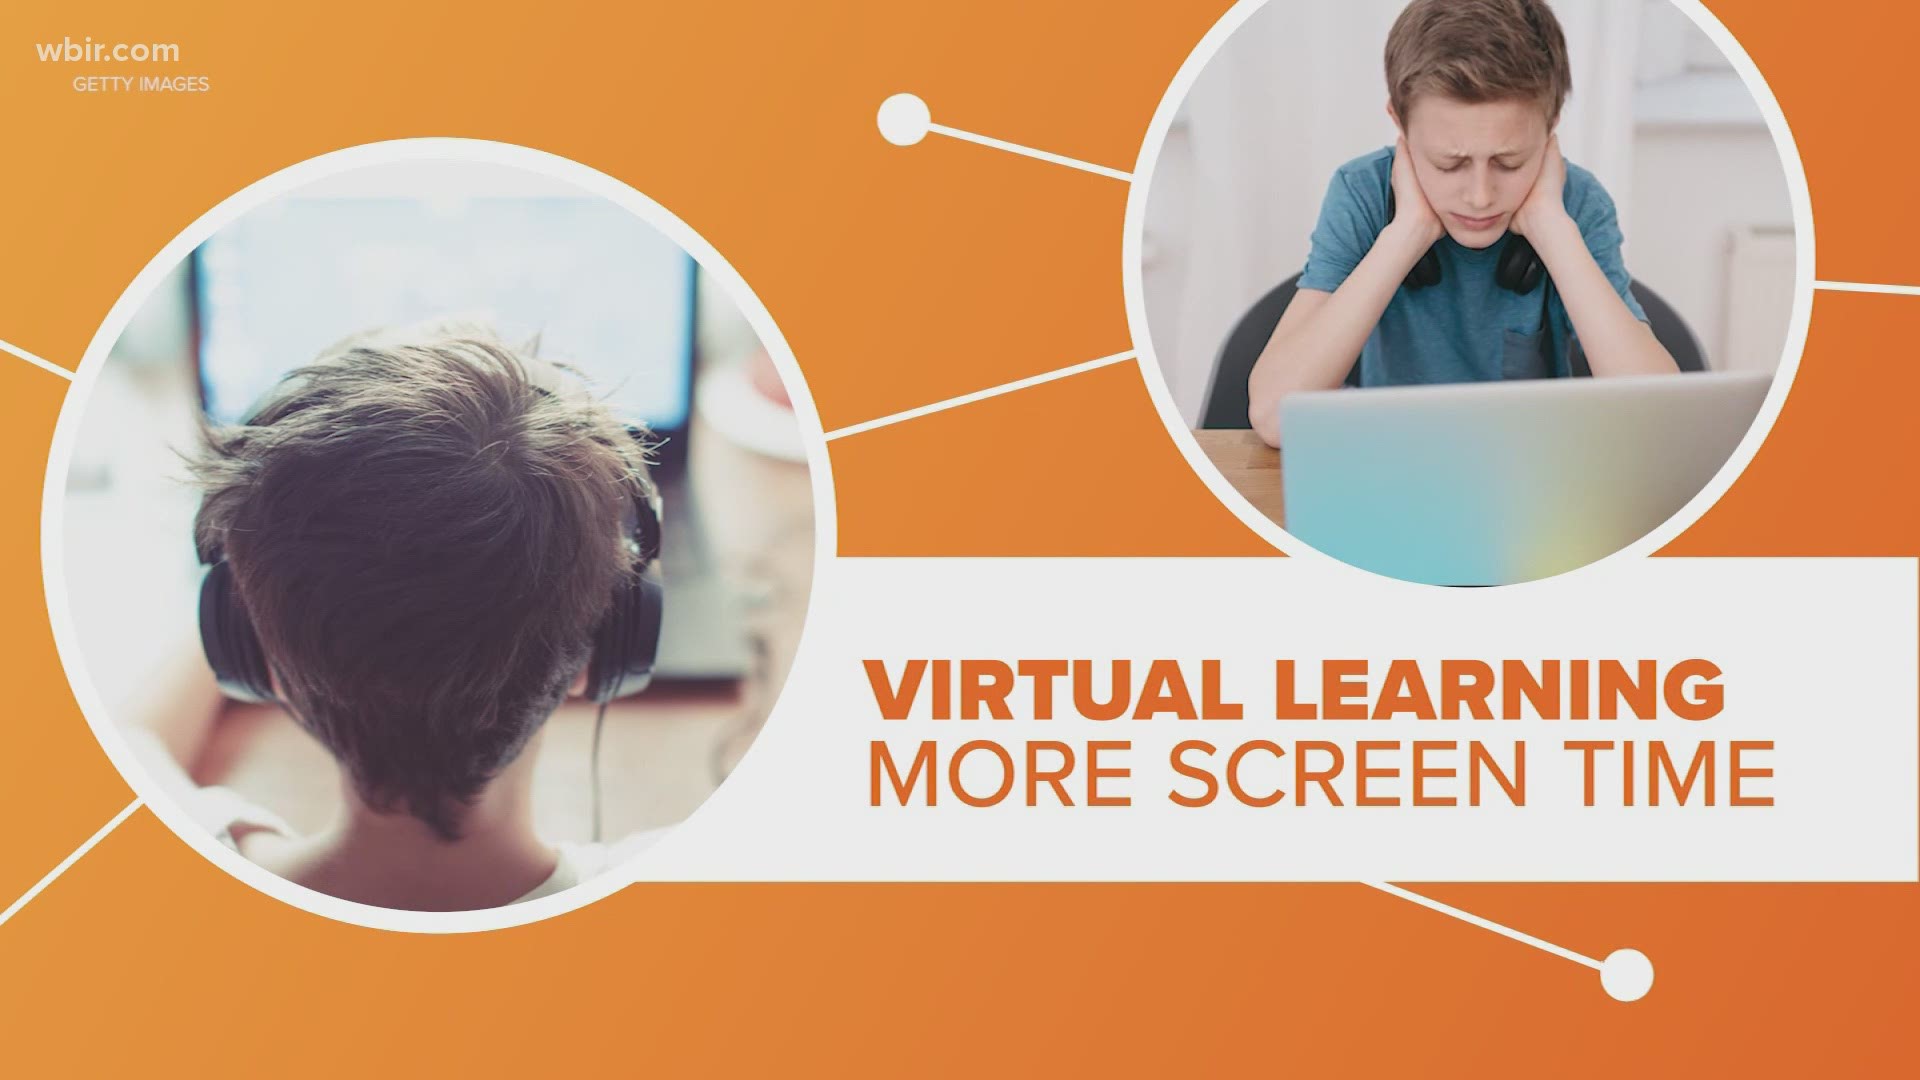 For kids in virtual learning more screen time will be unavoidable this school year, but should parents be worried about children glued to a screen all day long?